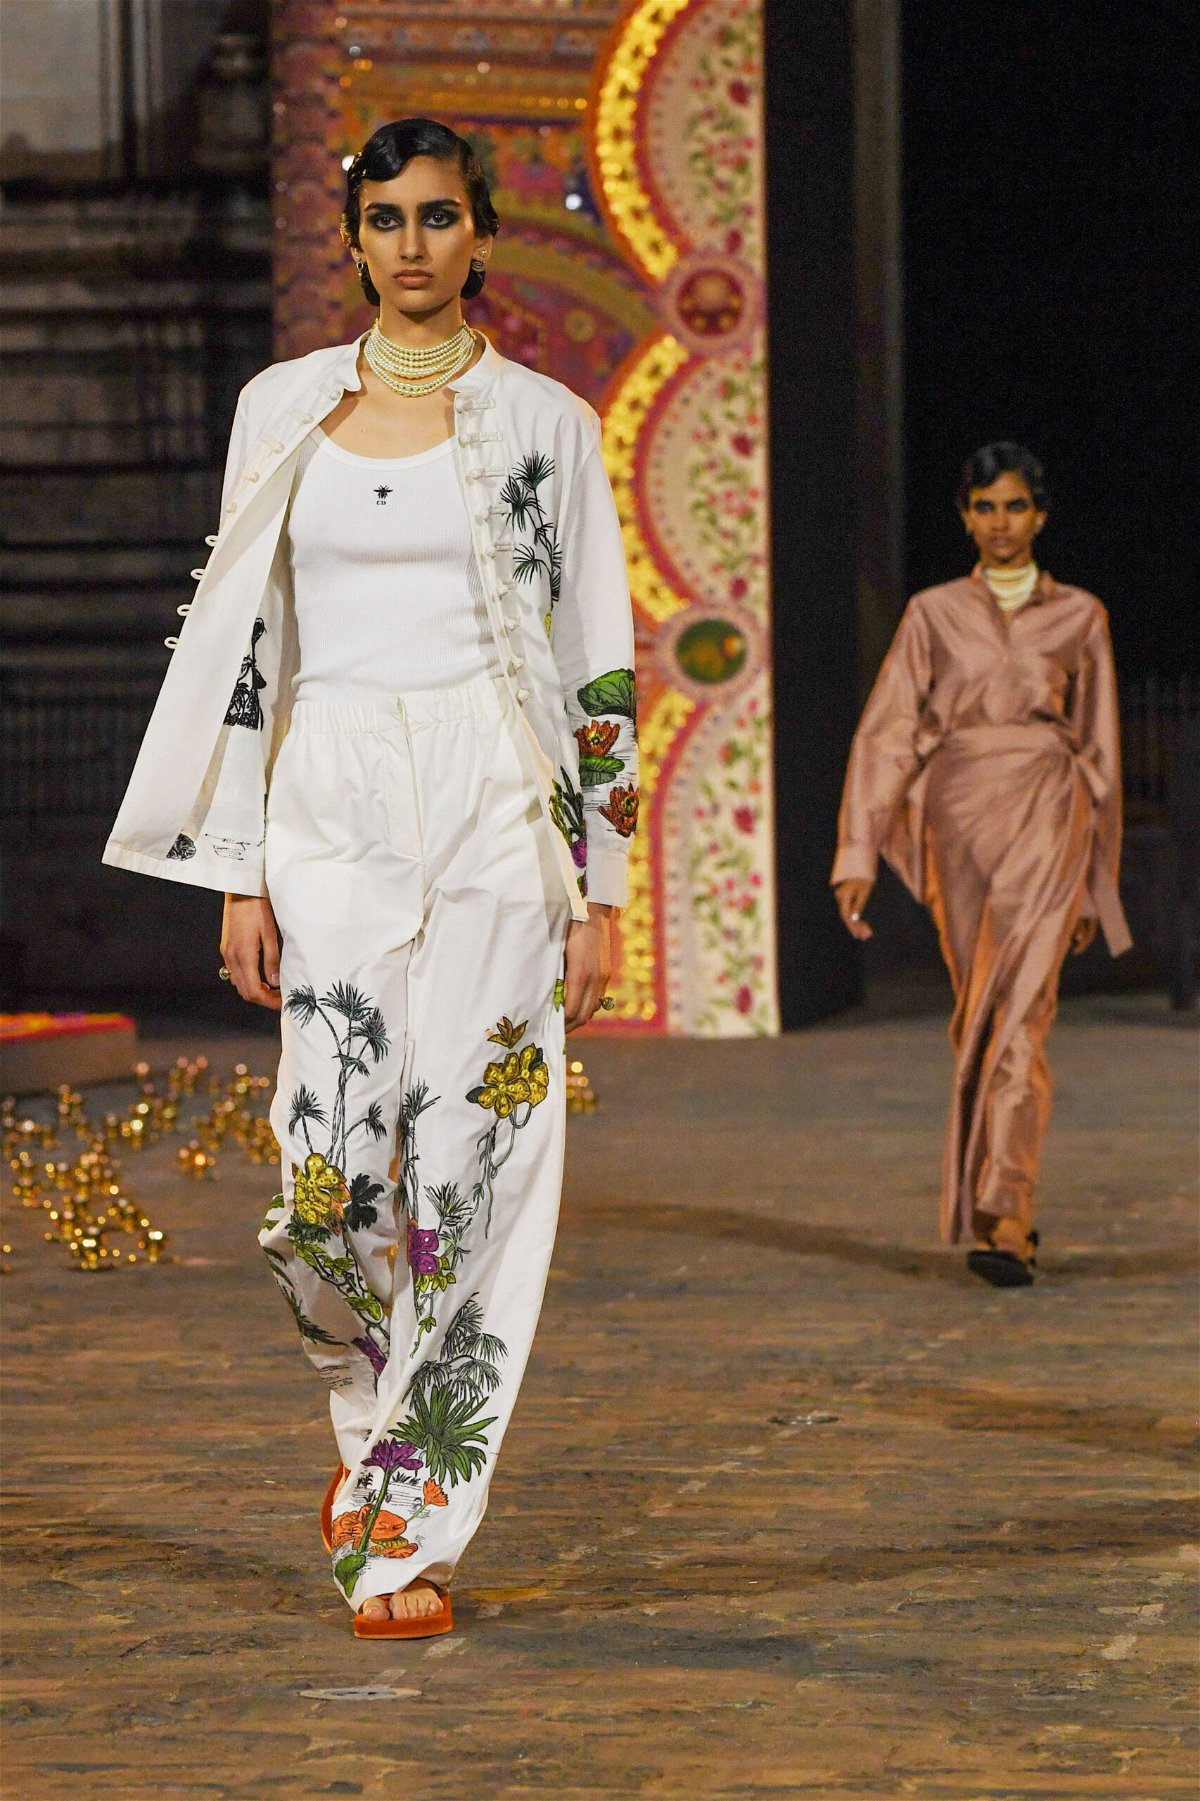 <i>Indranil Mukherjee/AFP/Getty Images</i><br/>Dior's Pre-Fall collection walked on a balmy evening in Mumbai.